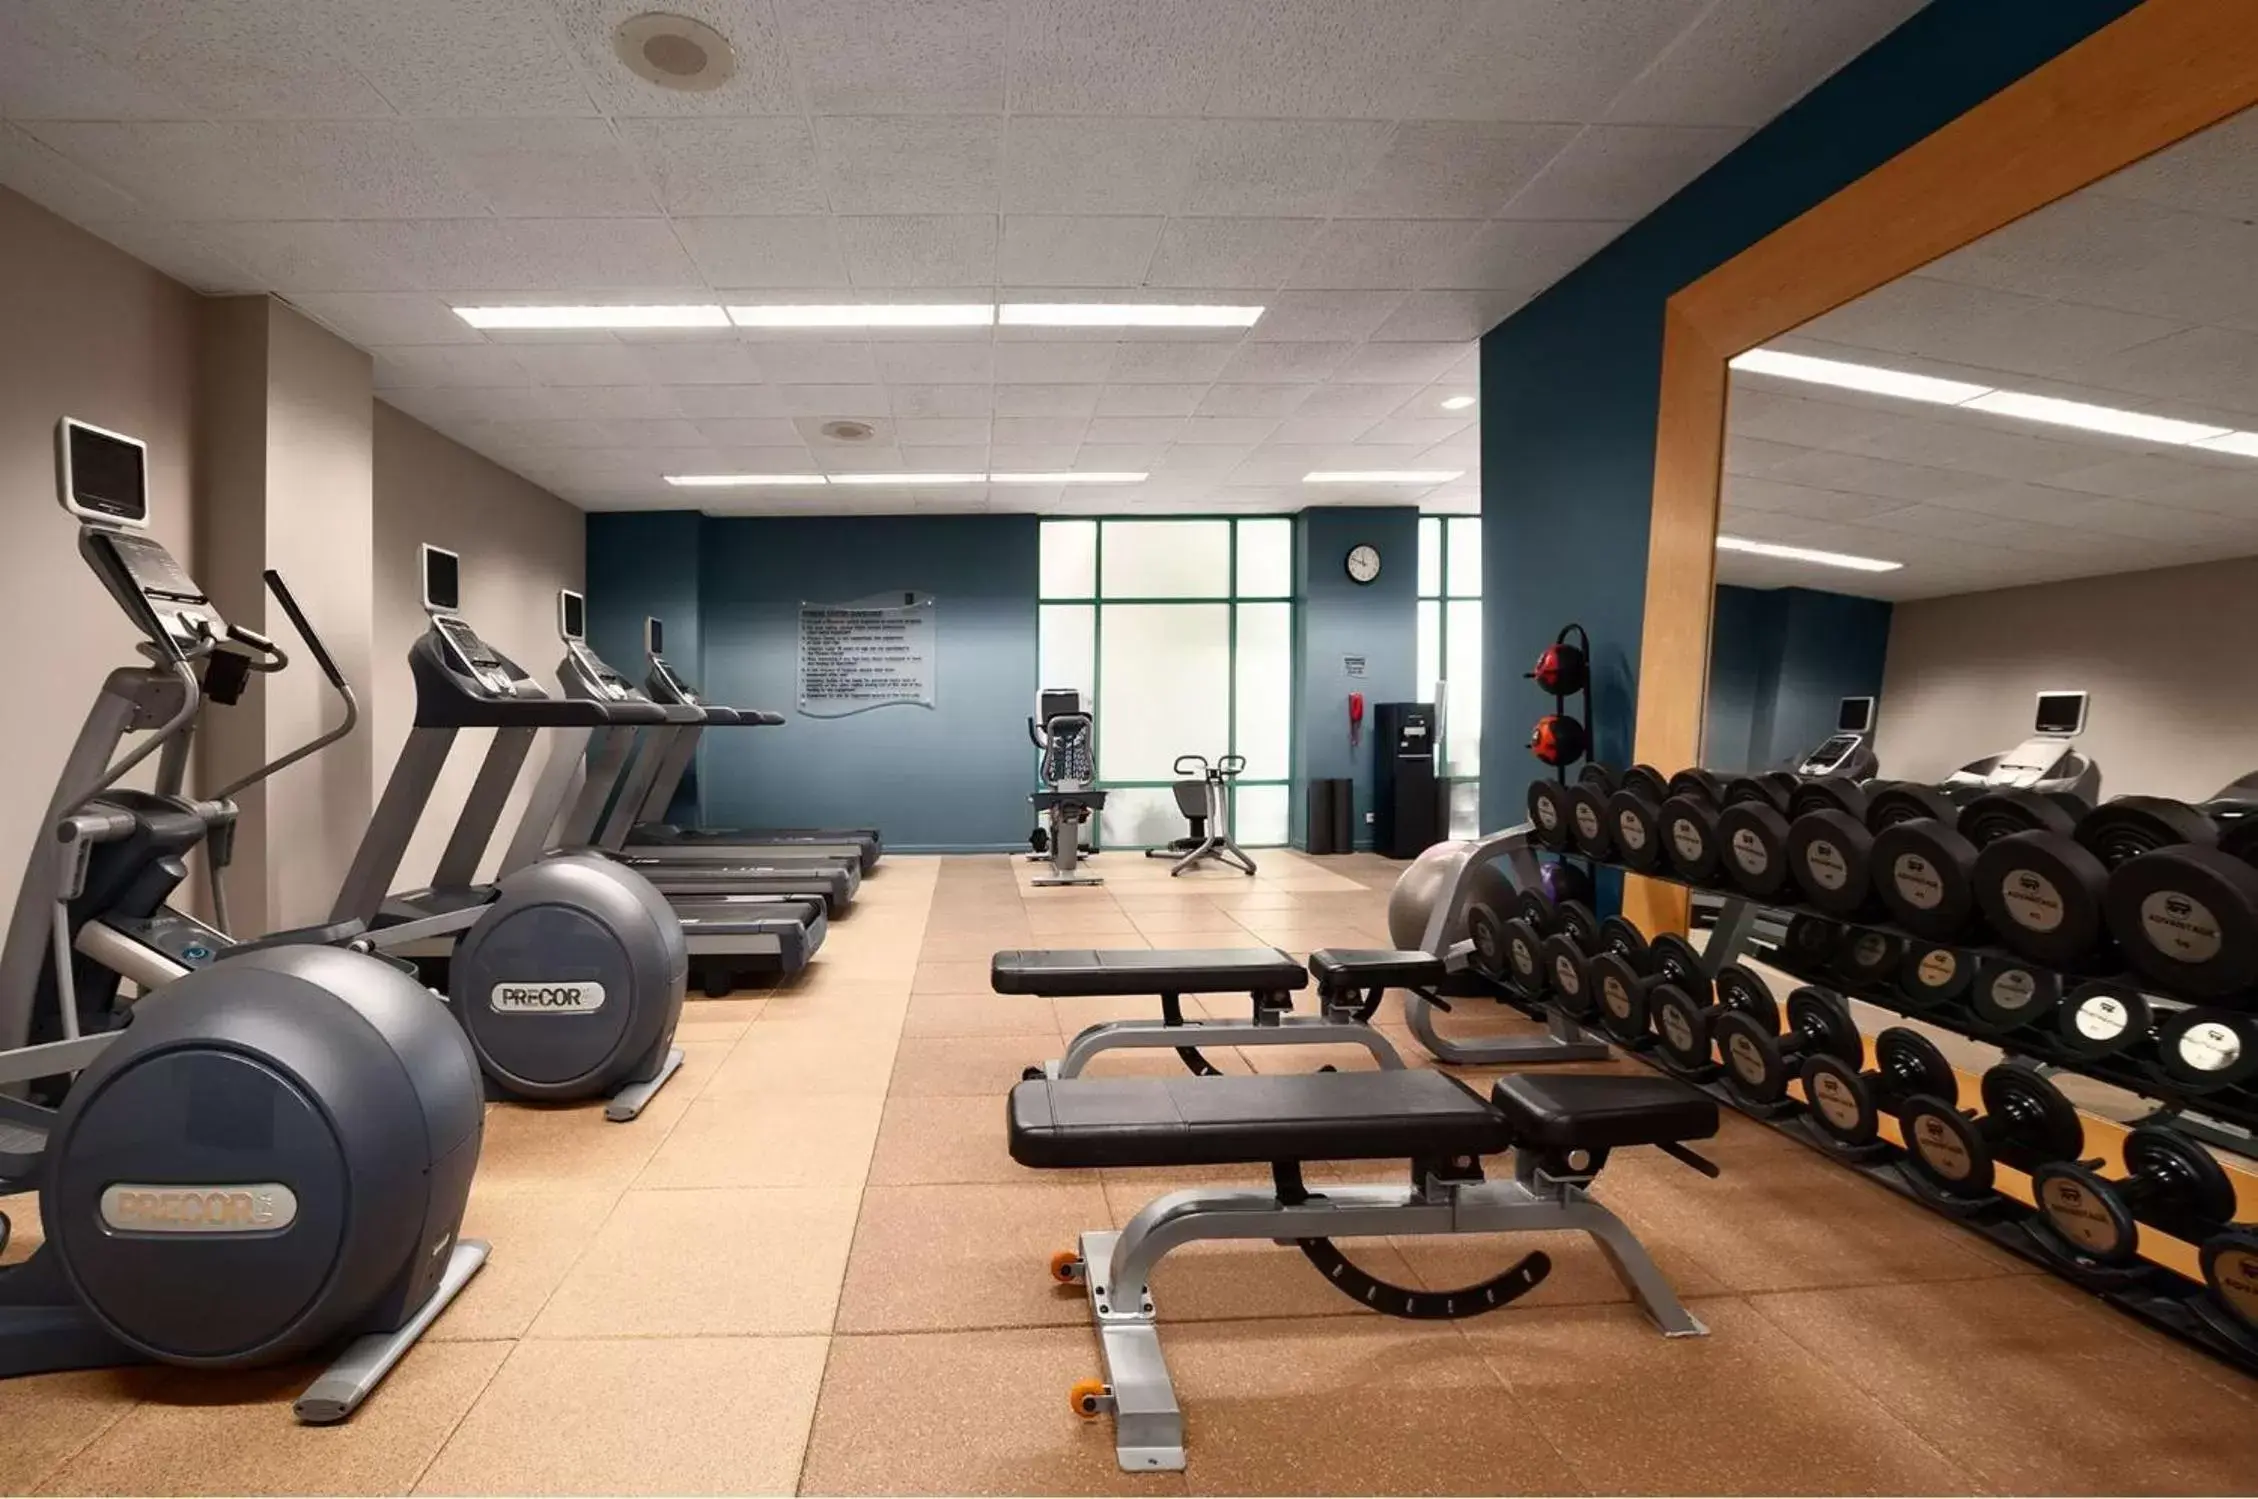 Fitness centre/facilities, Fitness Center/Facilities in Embassy Suites by Hilton Chicago Lombard